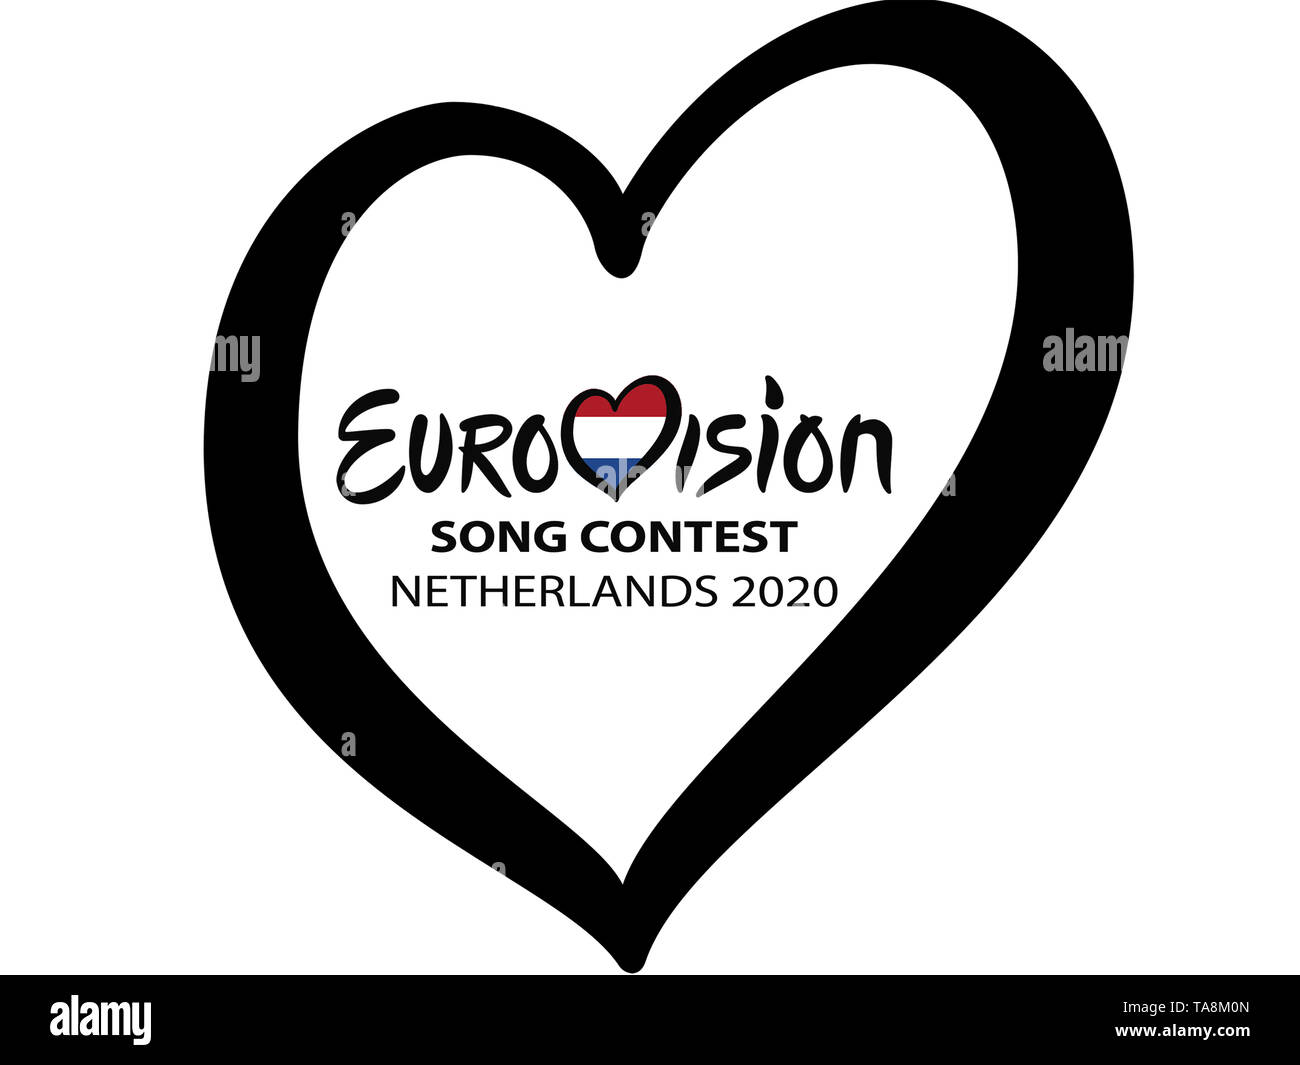 Winner of Eurovision Song Contest 2019 TEL AVIV, ISRAEL - May 2019: Text Netherlands 2020 Eurovision Heart on white background Stock Photo